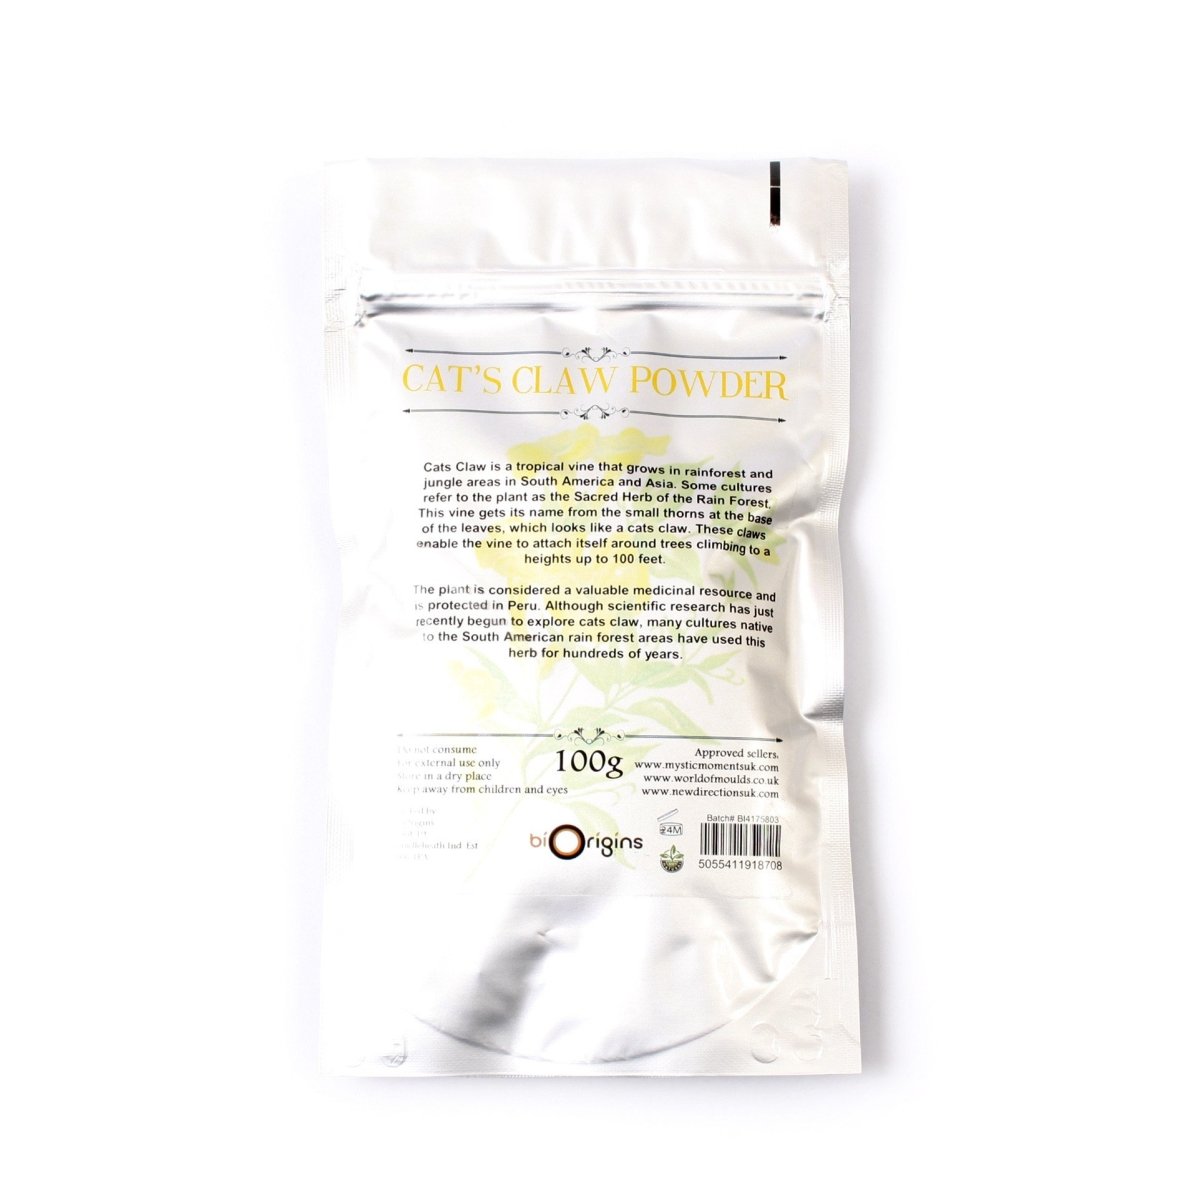 Cats Claw Powder - Herbal Extracts - Mystic Moments UK